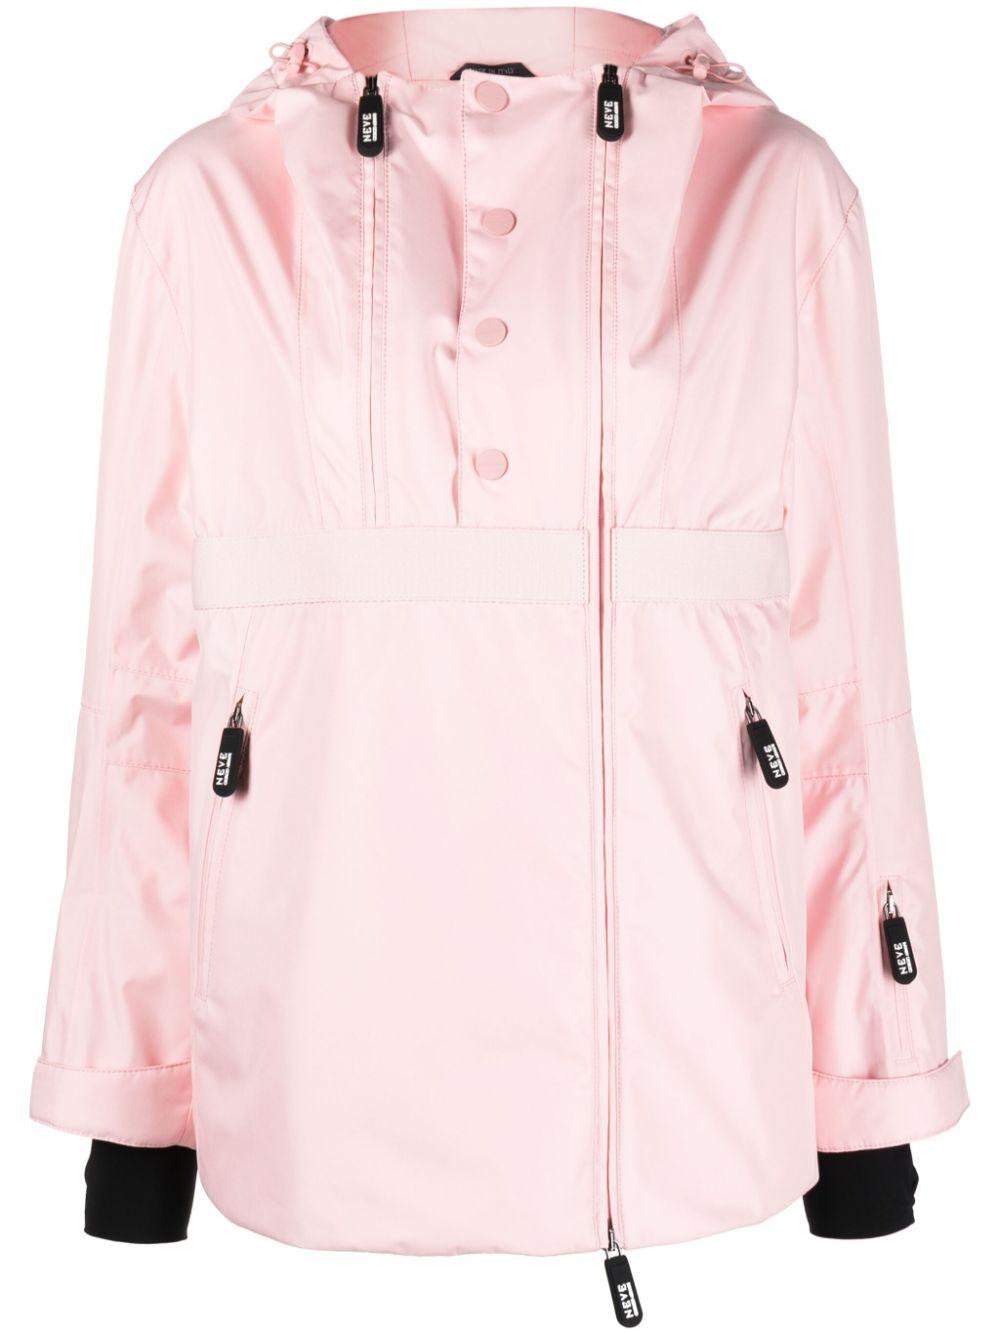 Giorgio Armani Padded Zip-up Down Peacoat in Pink | Lyst